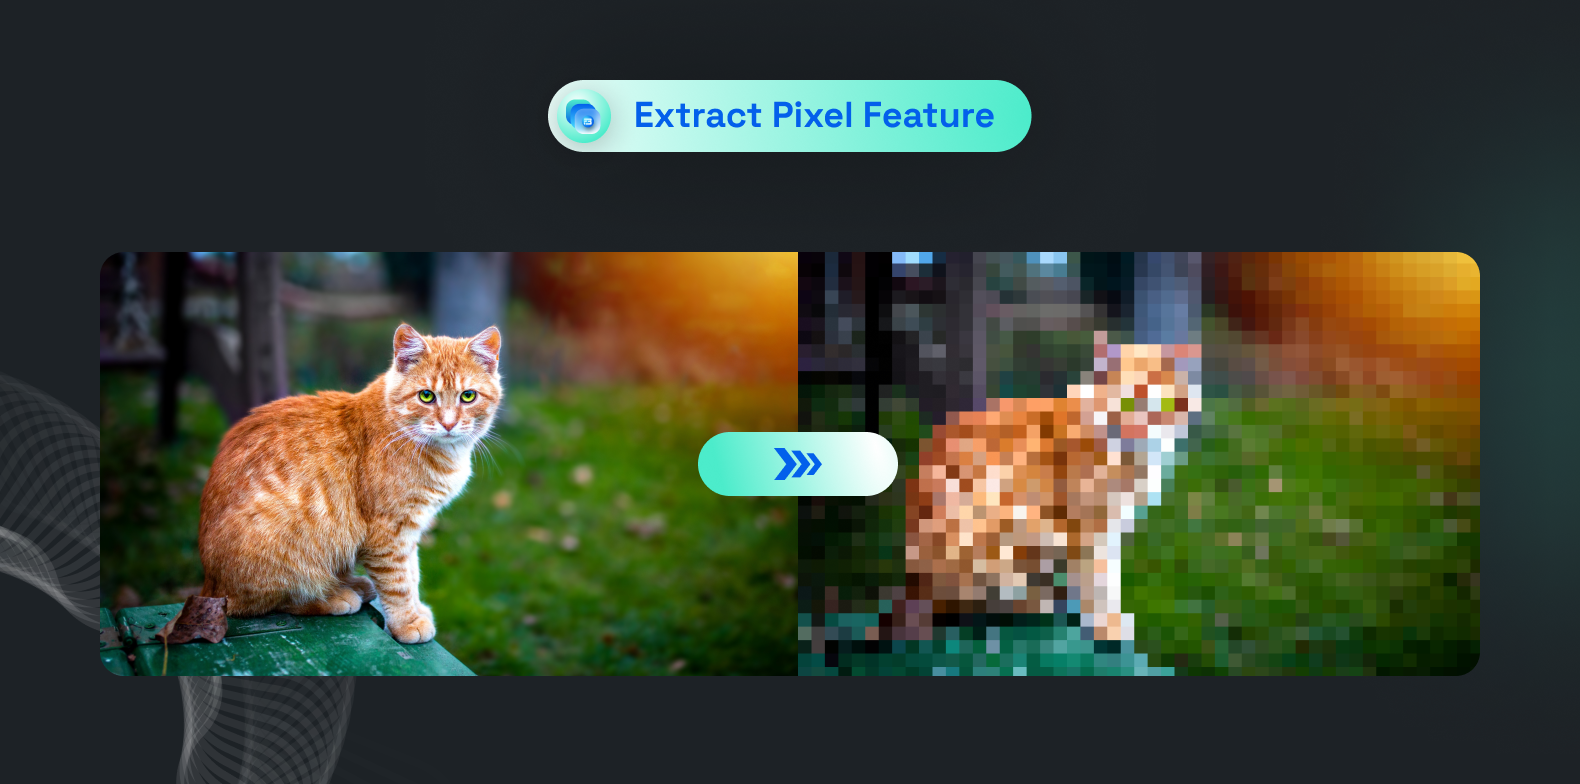 Conversion of a raw image of a cat into pixelated image extraction for image recognition.